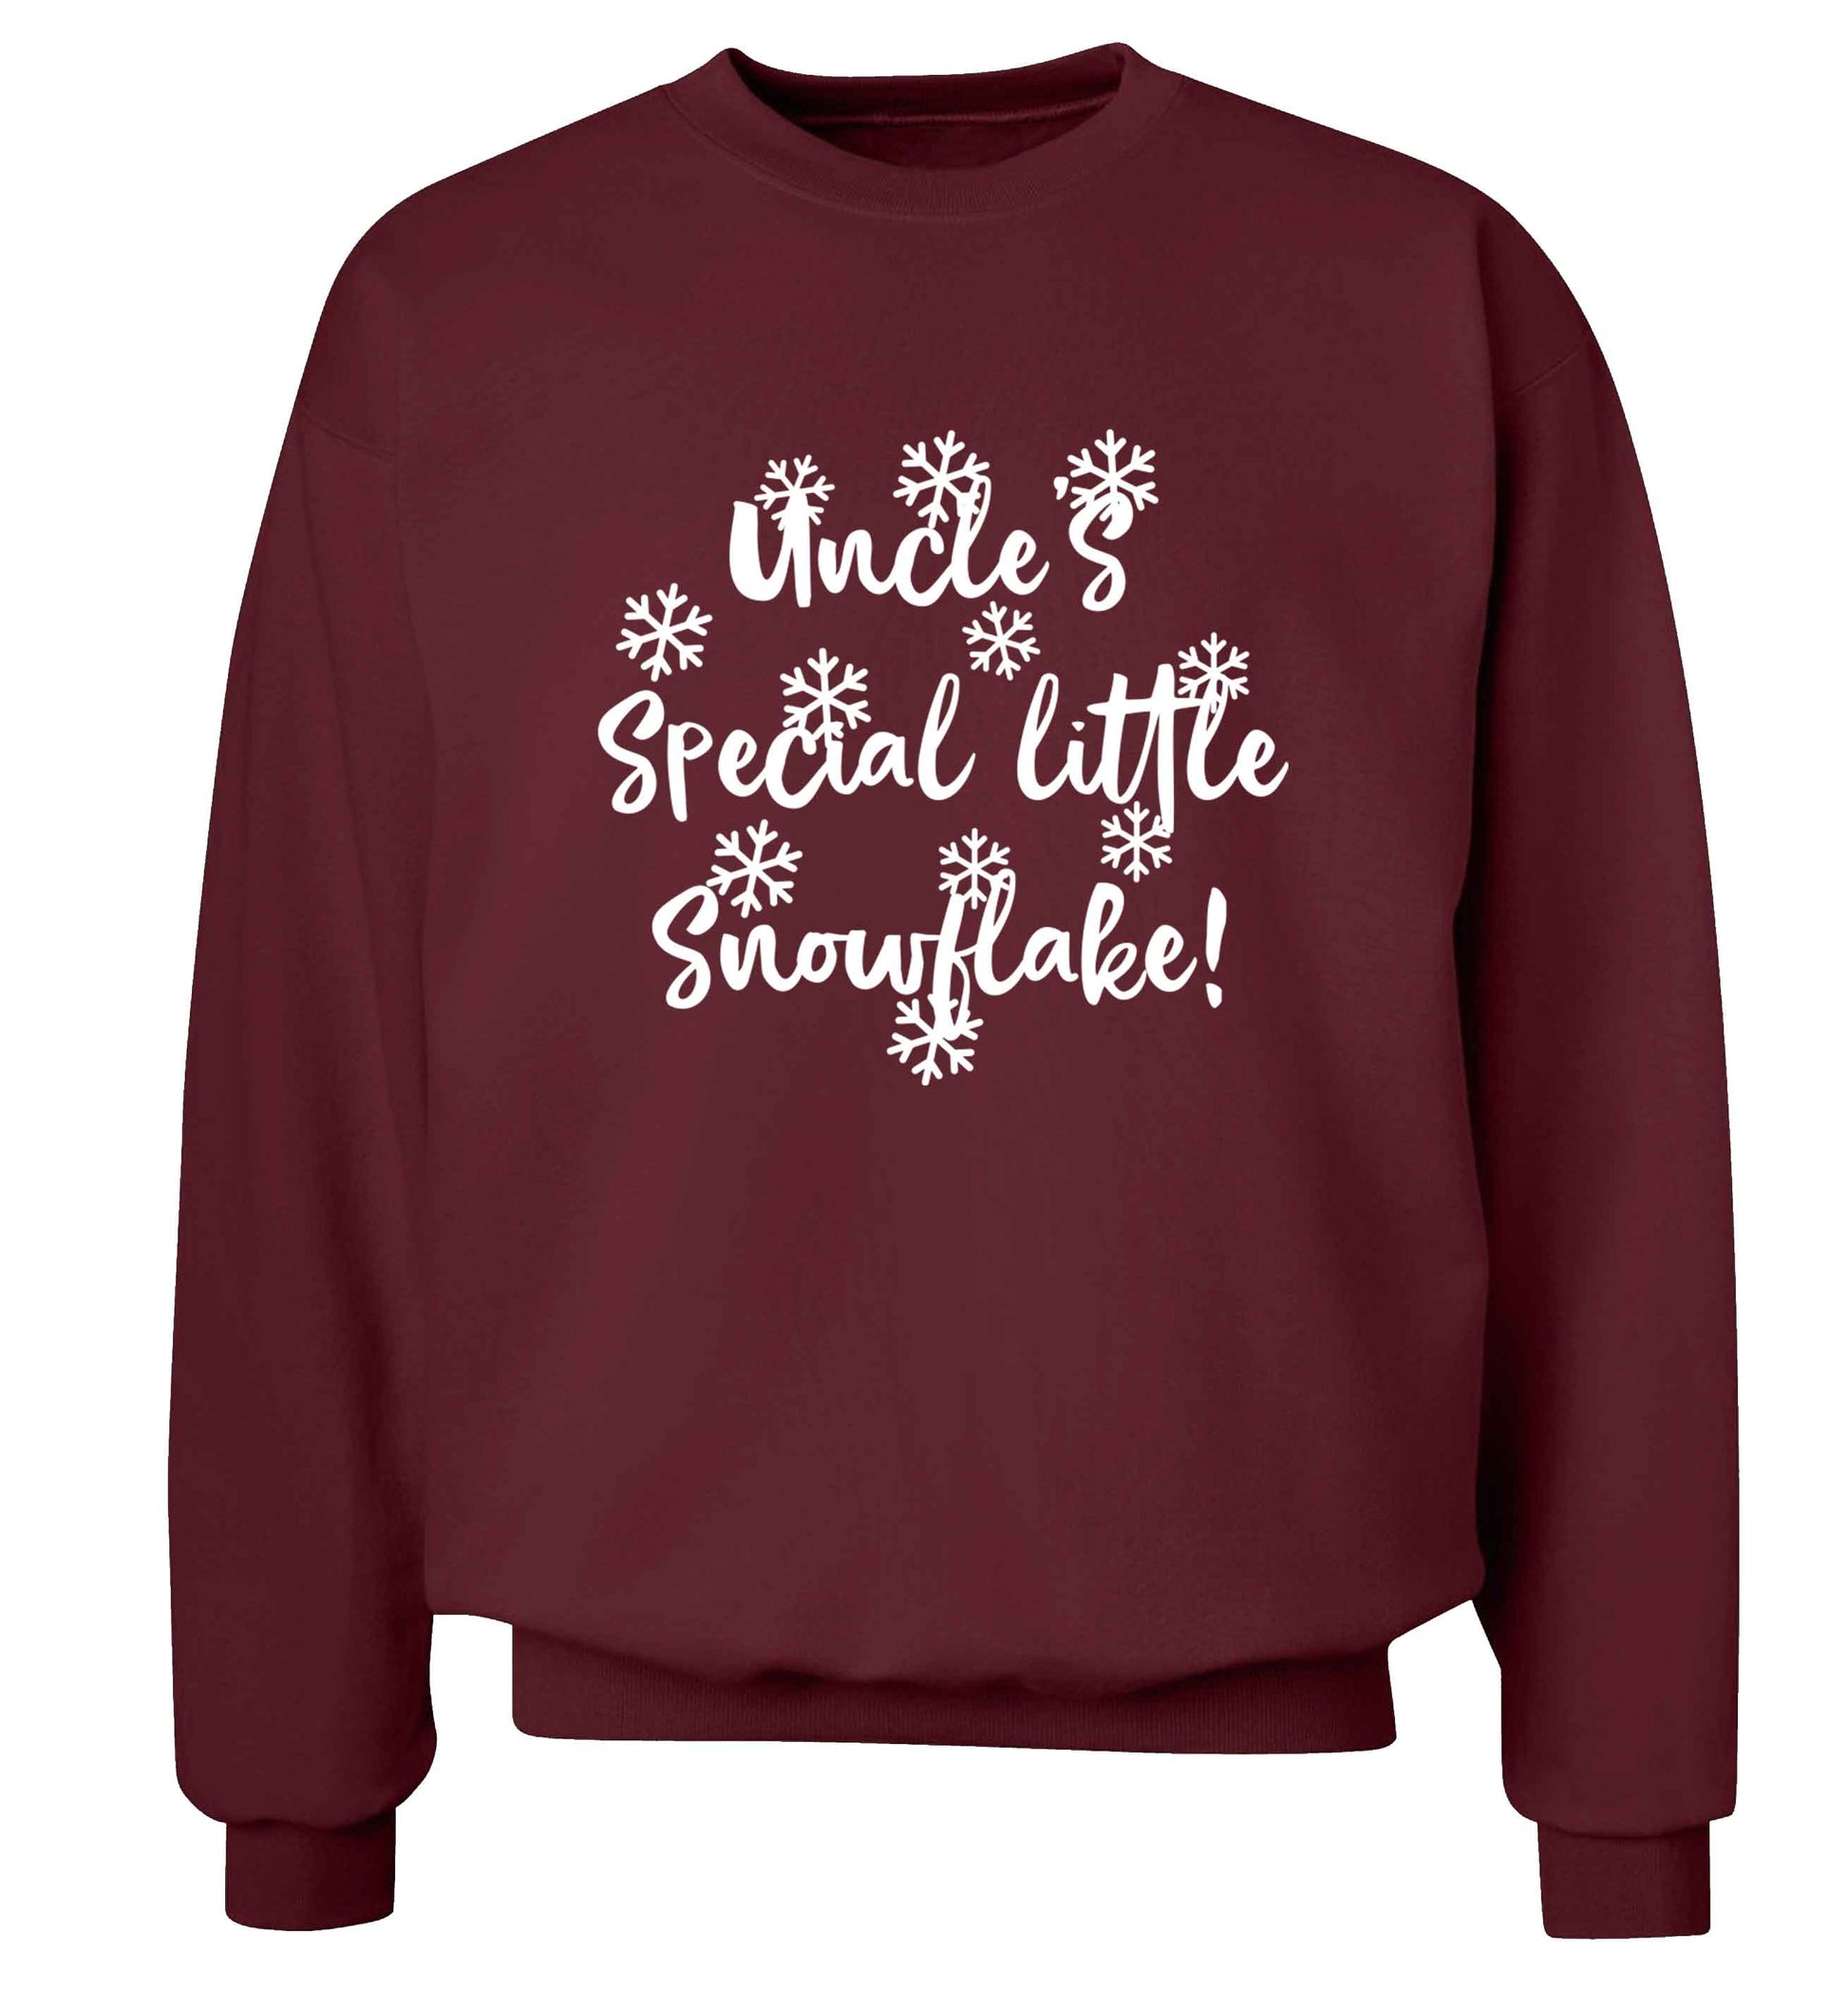 Uncle's special little snowflake Adult's unisex maroon Sweater 2XL